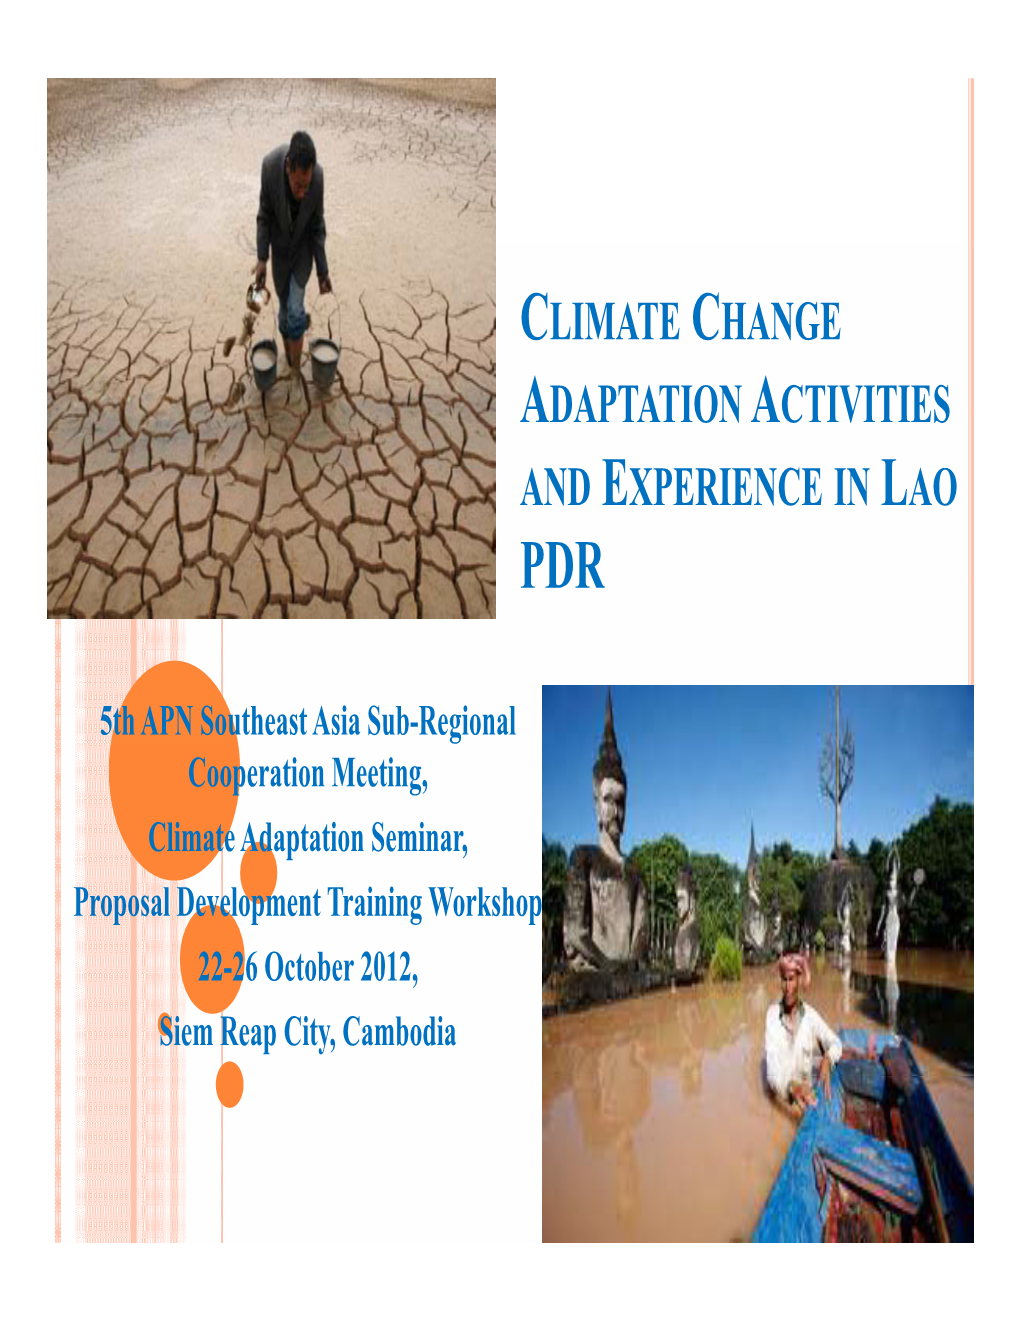 Climate Change Adaptation in Lao